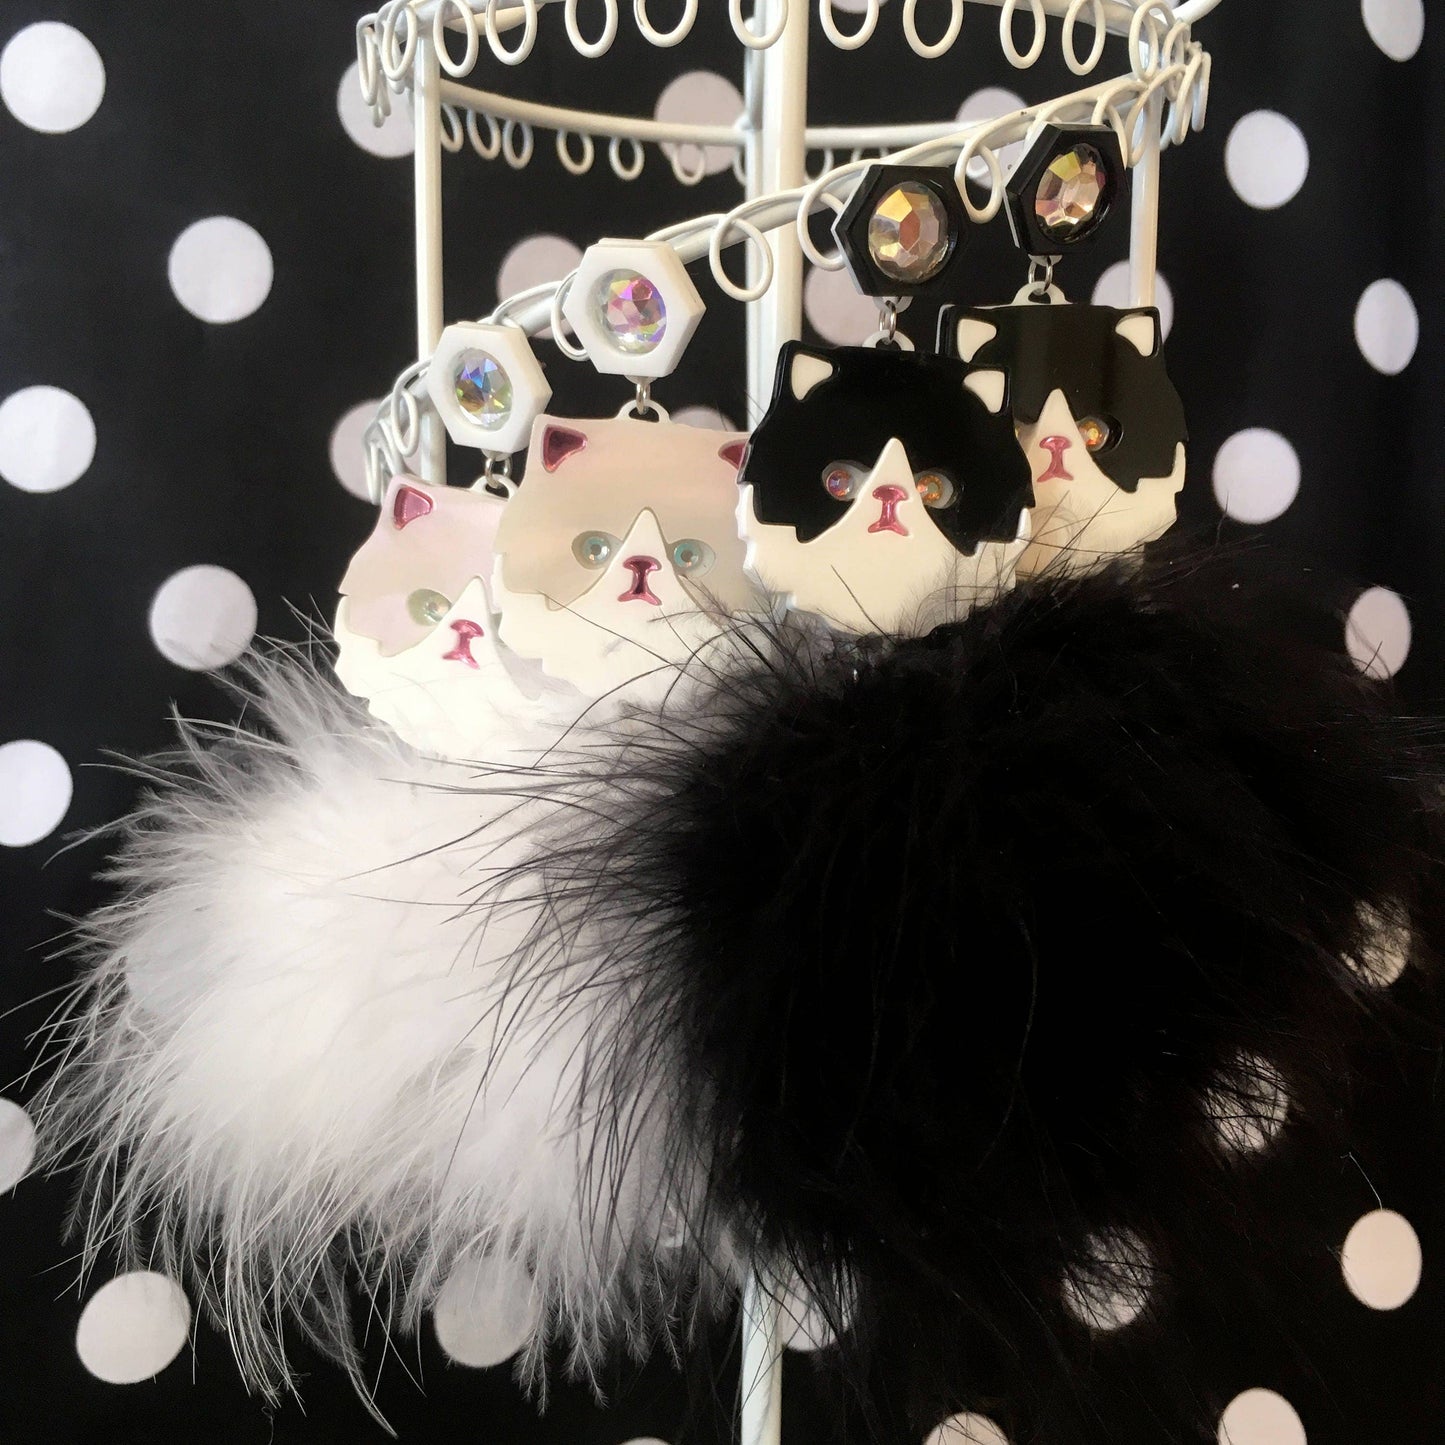 I'm Your Present - Persian Kitty Cat And Pom Pom Earrings In White Or Black & White, Laser Cut Acrylic, Plastic Jewelry